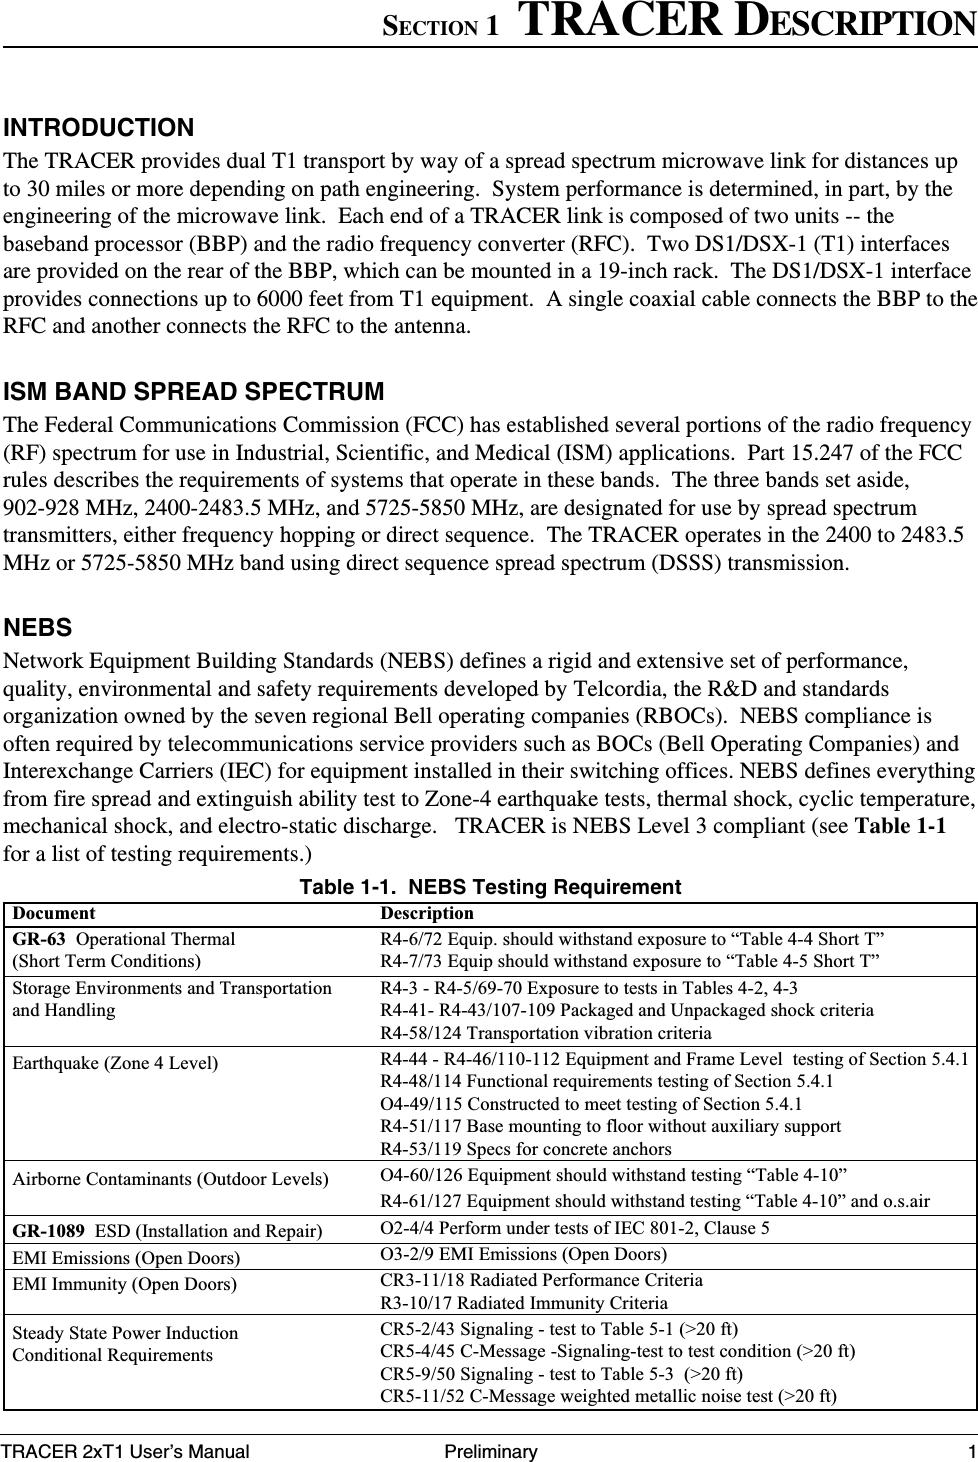 TRACER 2xT1 User’s Manual61280003L2-1BSection 1  TRACER Description1PreliminaryINTRODUCTIONThe TRACER provides dual T1 transport by way of a spread spectrum microwave link for distances upto 30 miles or more depending on path engineering.  System performance is determined, in part, by theengineering of the microwave link.  Each end of a TRACER link is composed of two units -- thebaseband processor (BBP) and the radio frequency converter (RFC).  Two DS1/DSX-1 (T1) interfacesare provided on the rear of the BBP, which can be mounted in a 19-inch rack.  The DS1/DSX-1 interfaceprovides connections up to 6000 feet from T1 equipment.  A single coaxial cable connects the BBP to theRFC and another connects the RFC to the antenna.ISM BAND SPREAD SPECTRUMThe Federal Communications Commission (FCC) has established several portions of the radio frequency(RF) spectrum for use in Industrial, Scientific, and Medical (ISM) applications.  Part 15.247 of the FCCrules describes the requirements of systems that operate in these bands.  The three bands set aside,902-928 MHz, 2400-2483.5 MHz, and 5725-5850 MHz, are designated for use by spread spectrumtransmitters, either frequency hopping or direct sequence.  The TRACER operates in the 2400 to 2483.5MHz or 5725-5850 MHz band using direct sequence spread spectrum (DSSS) transmission.NEBSNetwork Equipment Building Standards (NEBS) defines a rigid and extensive set of performance,quality, environmental and safety requirements developed by Telcordia, the R&amp;D and standardsorganization owned by the seven regional Bell operating companies (RBOCs).  NEBS compliance isoften required by telecommunications service providers such as BOCs (Bell Operating Companies) andInterexchange Carriers (IEC) for equipment installed in their switching offices. NEBS defines everythingfrom fire spread and extinguish ability test to Zone-4 earthquake tests, thermal shock, cyclic temperature,mechanical shock, and electro-static discharge.   TRACER is NEBS Level 3 compliant (see Table 1-1for a list of testing requirements.)Table 1-1.  NEBS Testing RequirementDescriptionR4-6/72 Equip. should withstand exposure to “Table 4-4 Short T”R4-7/73 Equip should withstand exposure to “Table 4-5 Short T”R4-3 - R4-5/69-70 Exposure to tests in Tables 4-2, 4-3R4-41- R4-43/107-109 Packaged and Unpackaged shock criteriaR4-58/124 Transportation vibration criteriaR4-44 - R4-46/110-112 Equipment and Frame Level  testing of Section 5.4.1R4-48/114 Functional requirements testing of Section 5.4.1O4-49/115 Constructed to meet testing of Section 5.4.1R4-51/117 Base mounting to floor without auxiliary supportR4-53/119 Specs for concrete anchorsO4-60/126 Equipment should withstand testing “Table 4-10”R4-61/127 Equipment should withstand testing “Table 4-10” and o.s.airO2-4/4 Perform under tests of IEC 801-2, Clause 5O3-2/9 EMI Emissions (Open Doors)CR3-11/18 Radiated Performance CriteriaR3-10/17 Radiated Immunity CriteriaCR5-2/43 Signaling - test to Table 5-1 (&gt;20 ft)CR5-4/45 C-Message -Signaling-test to test condition (&gt;20 ft)CR5-9/50 Signaling - test to Table 5-3  (&gt;20 ft)CR5-11/52 C-Message weighted metallic noise test (&gt;20 ft)DocumentGR-63  Operational Thermal(Short Term Conditions)Storage Environments and Transportationand HandlingEarthquake (Zone 4 Level)Airborne Contaminants (Outdoor Levels)GR-1089  ESD (Installation and Repair)EMI Emissions (Open Doors)EMI Immunity (Open Doors)Steady State Power InductionConditional RequirementsSECTION 1  TRACER DESCRIPTION